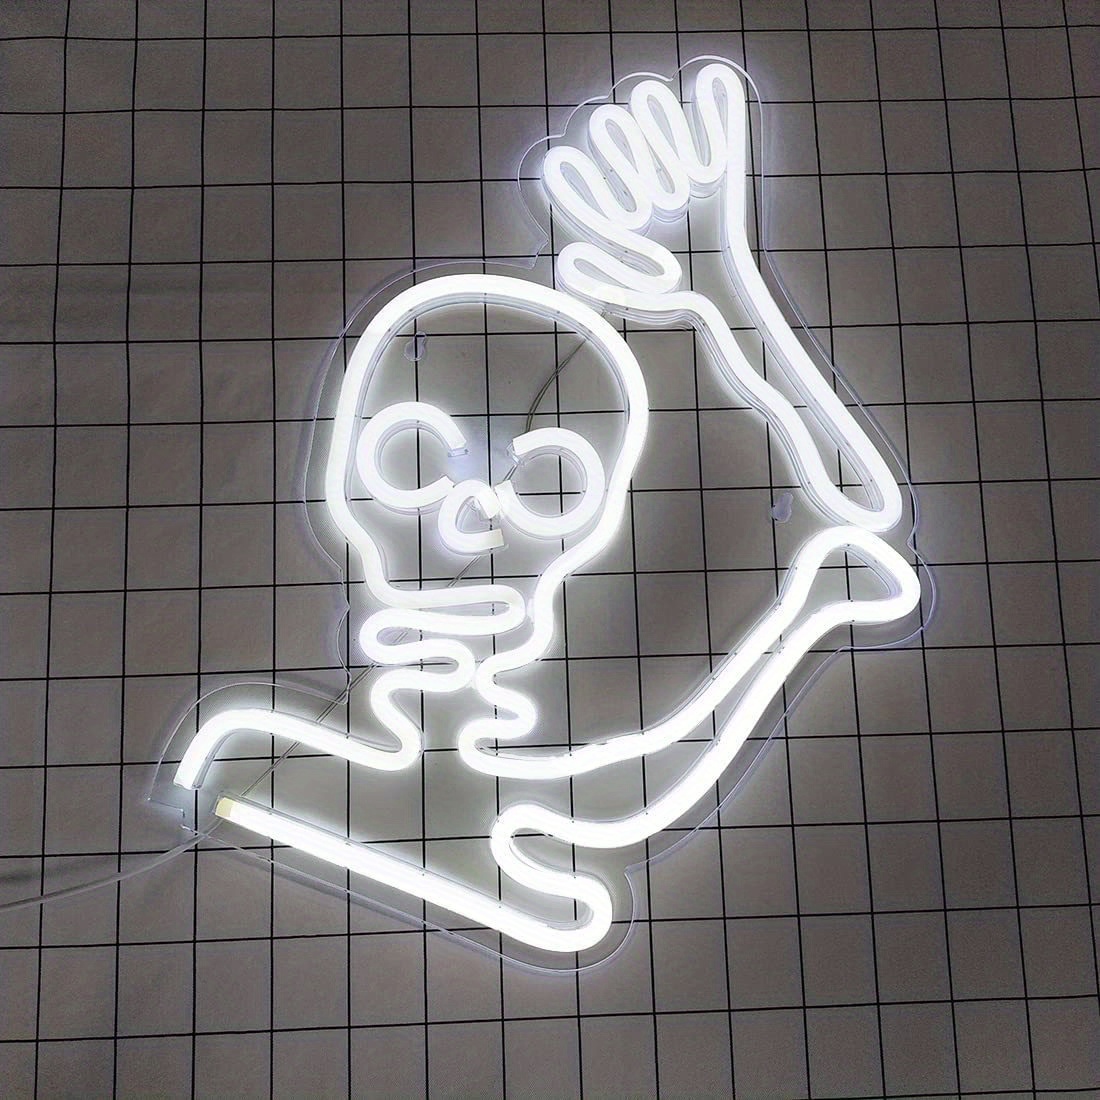 skeleton shape led neon sign lights withe line painting usb plug 2m line with switch transparent acrylic backplane pvc tube for halloween home shop bar decoration decor details 2